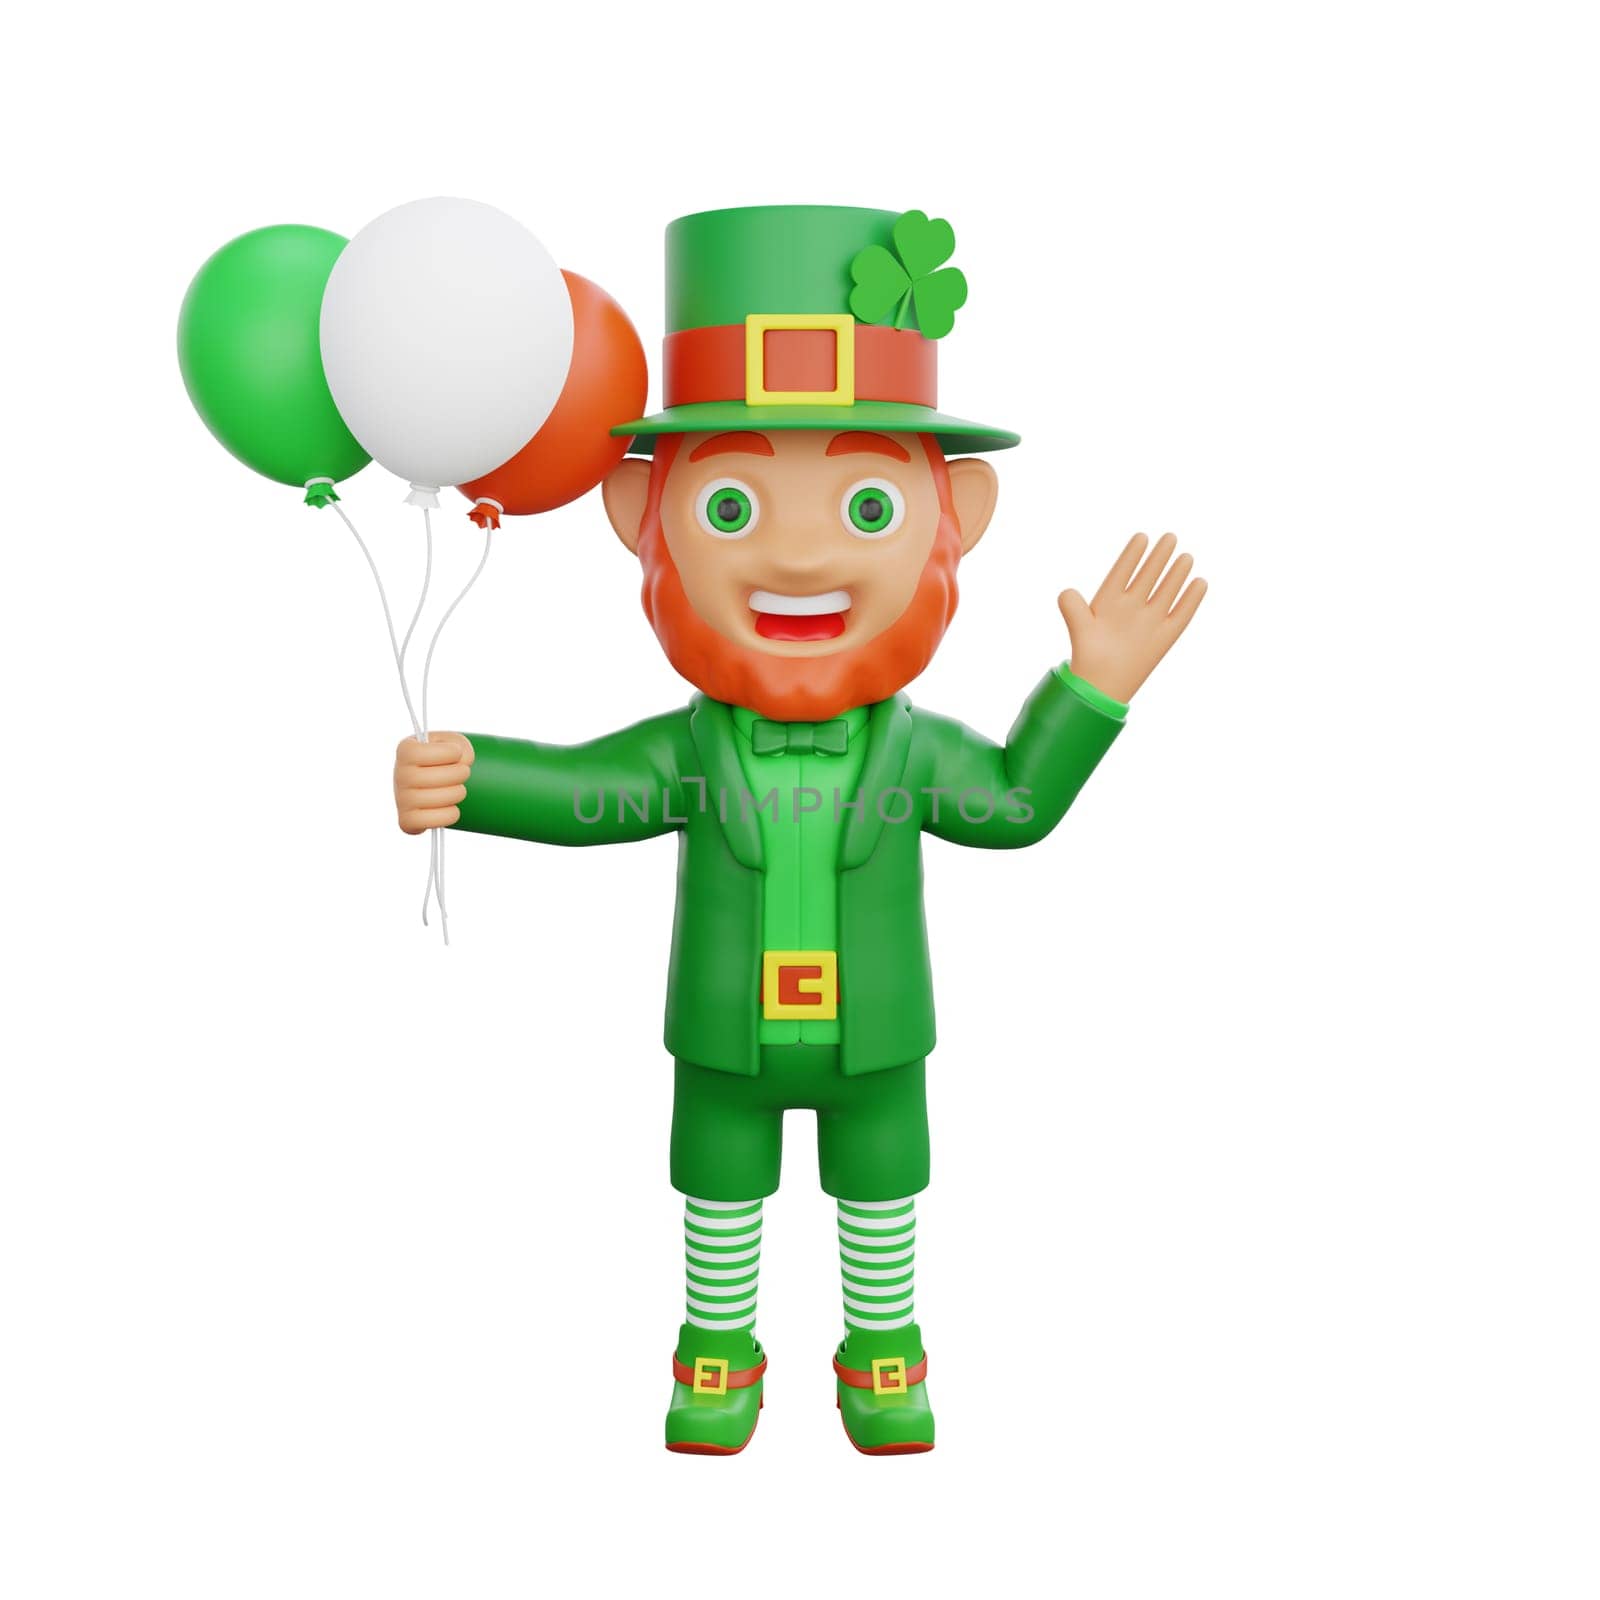 3D illustration of a cheerful leprechaun, waves hello while holding balloons, perfect for St. Patrick's Day themed projects